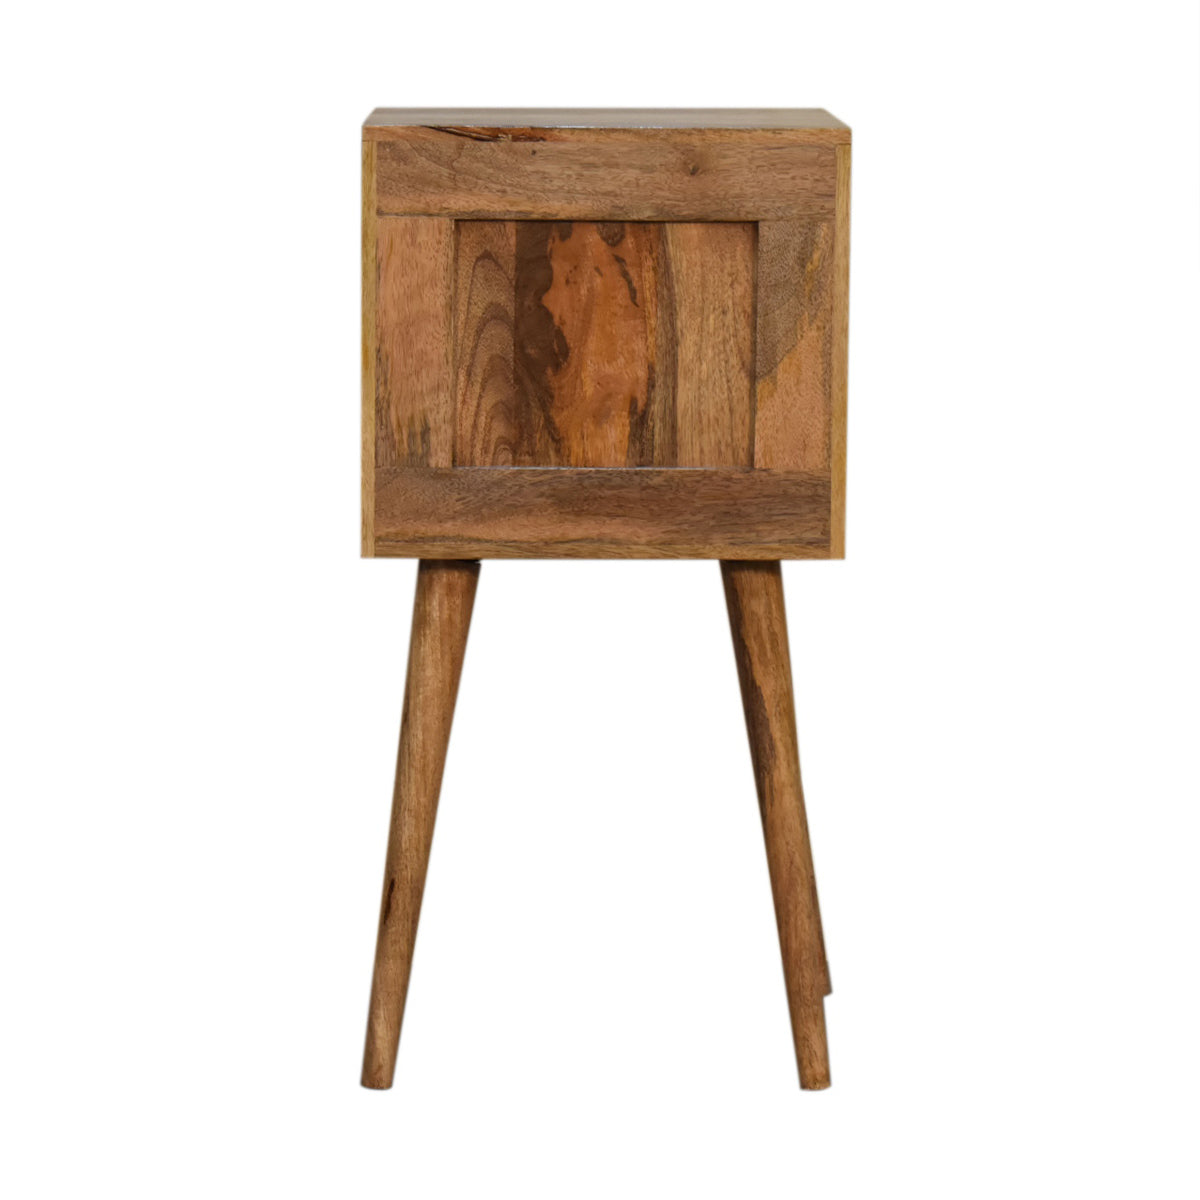 Mini Cube Bedside with Carved Drawers - Oak-ish Finish